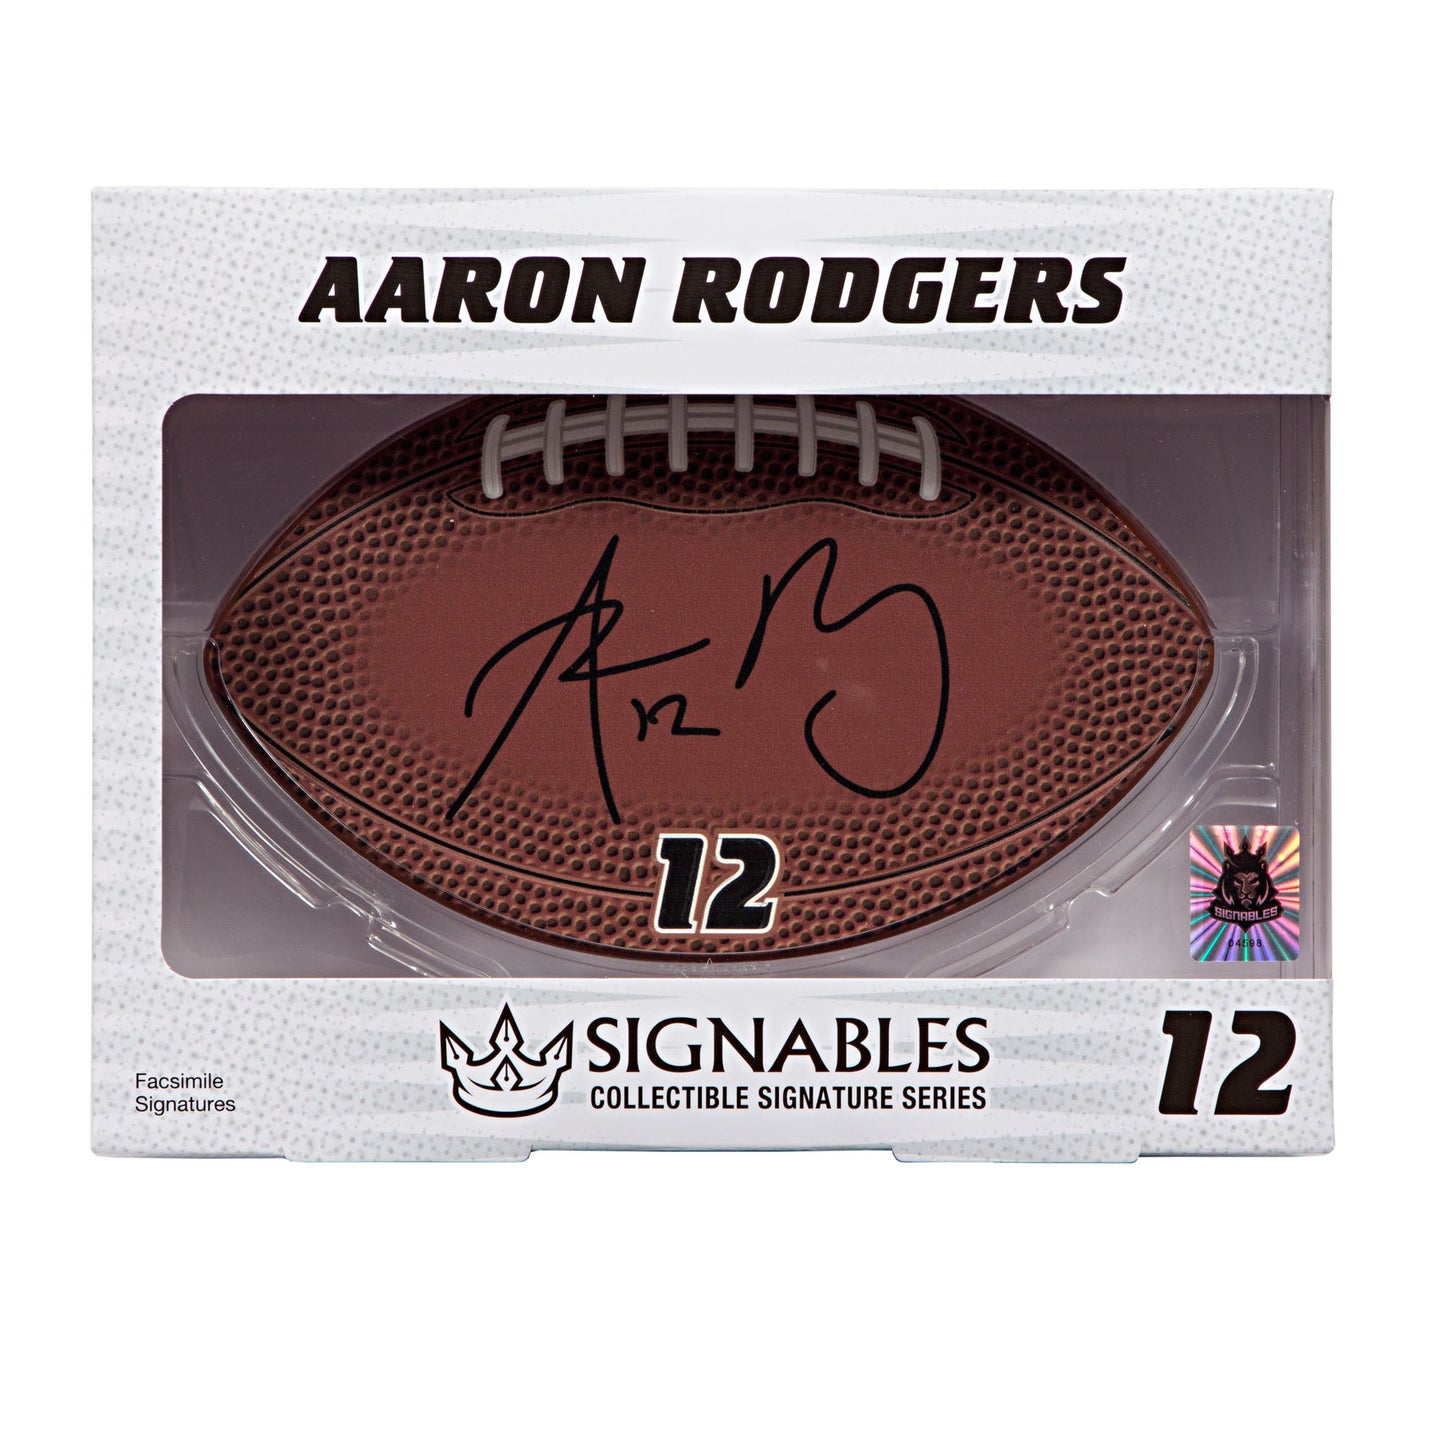 Aaron Rodgers NFLPA Sports Collectible Facsimile Signature